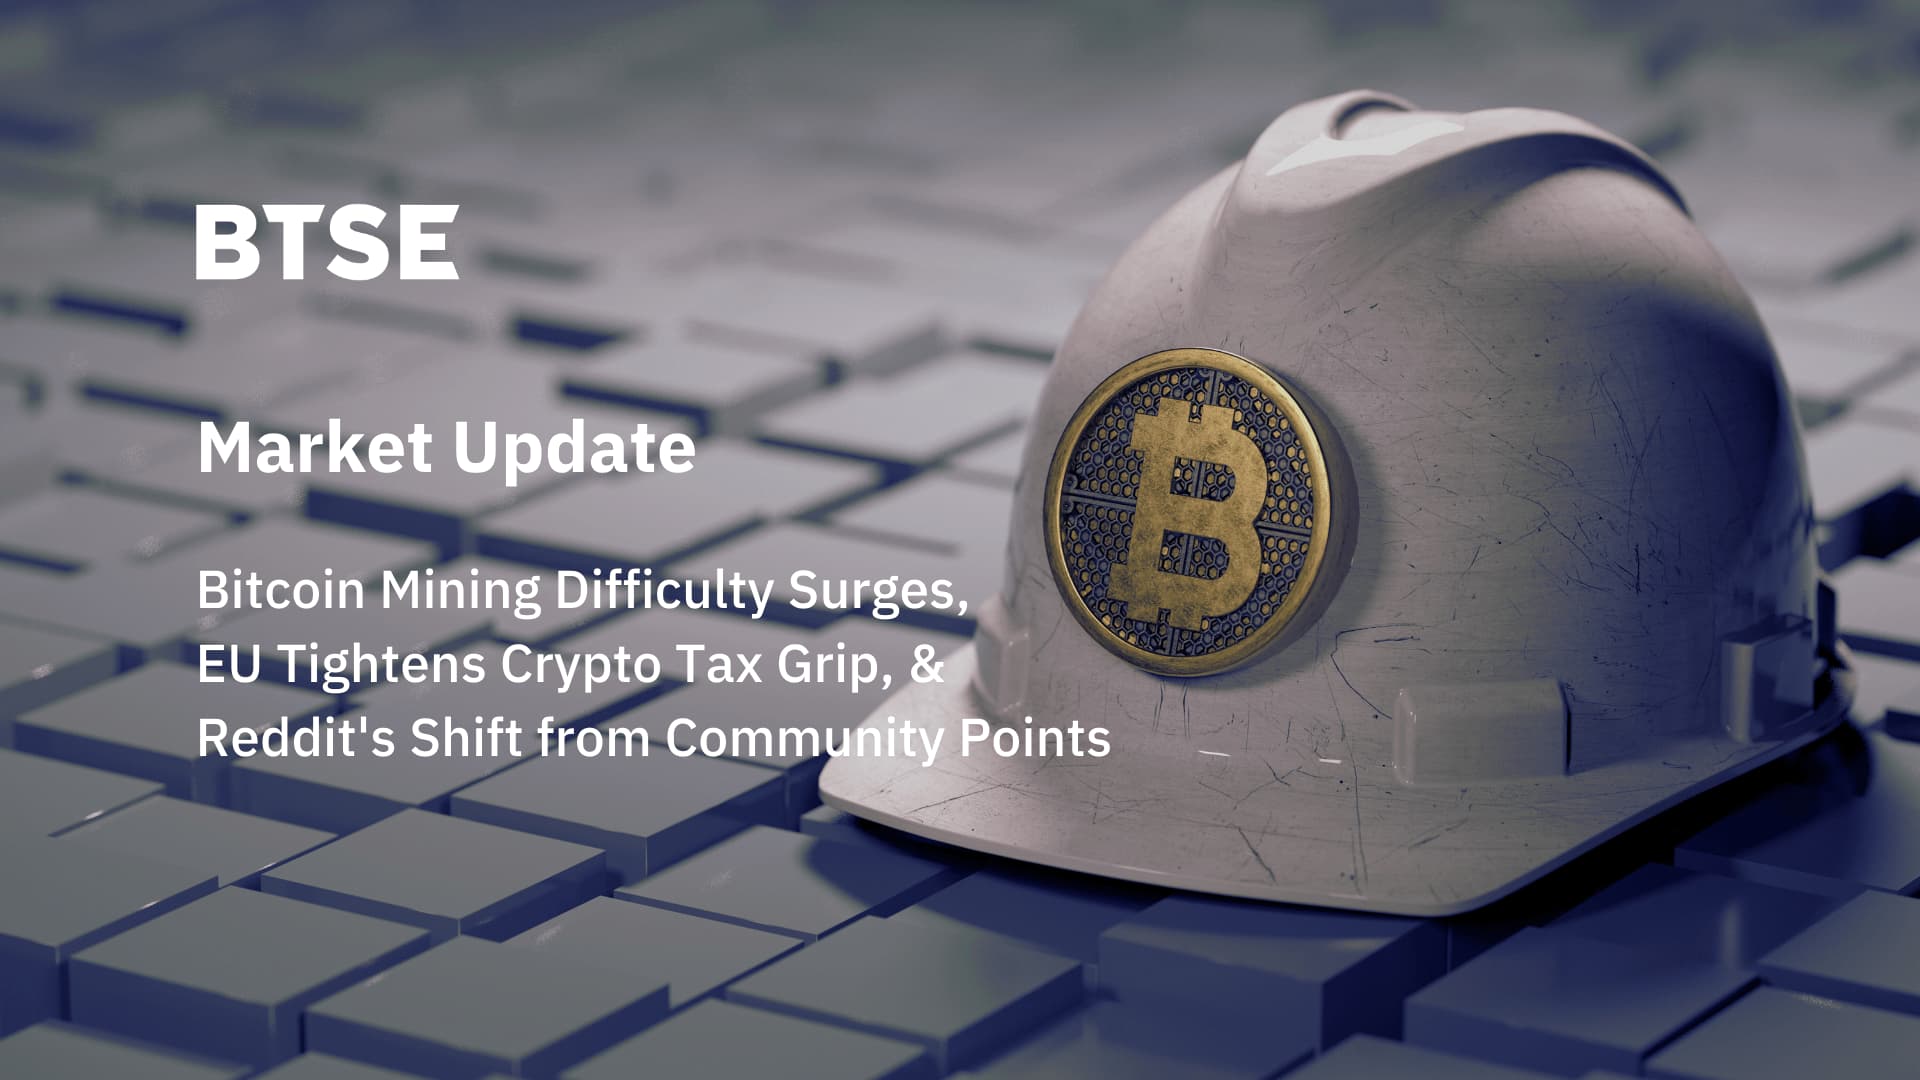 Bitcoin Mining Difficulty Surges, EU Tightens Crypto Tax Grip, & Reddit's Shift from Community Points